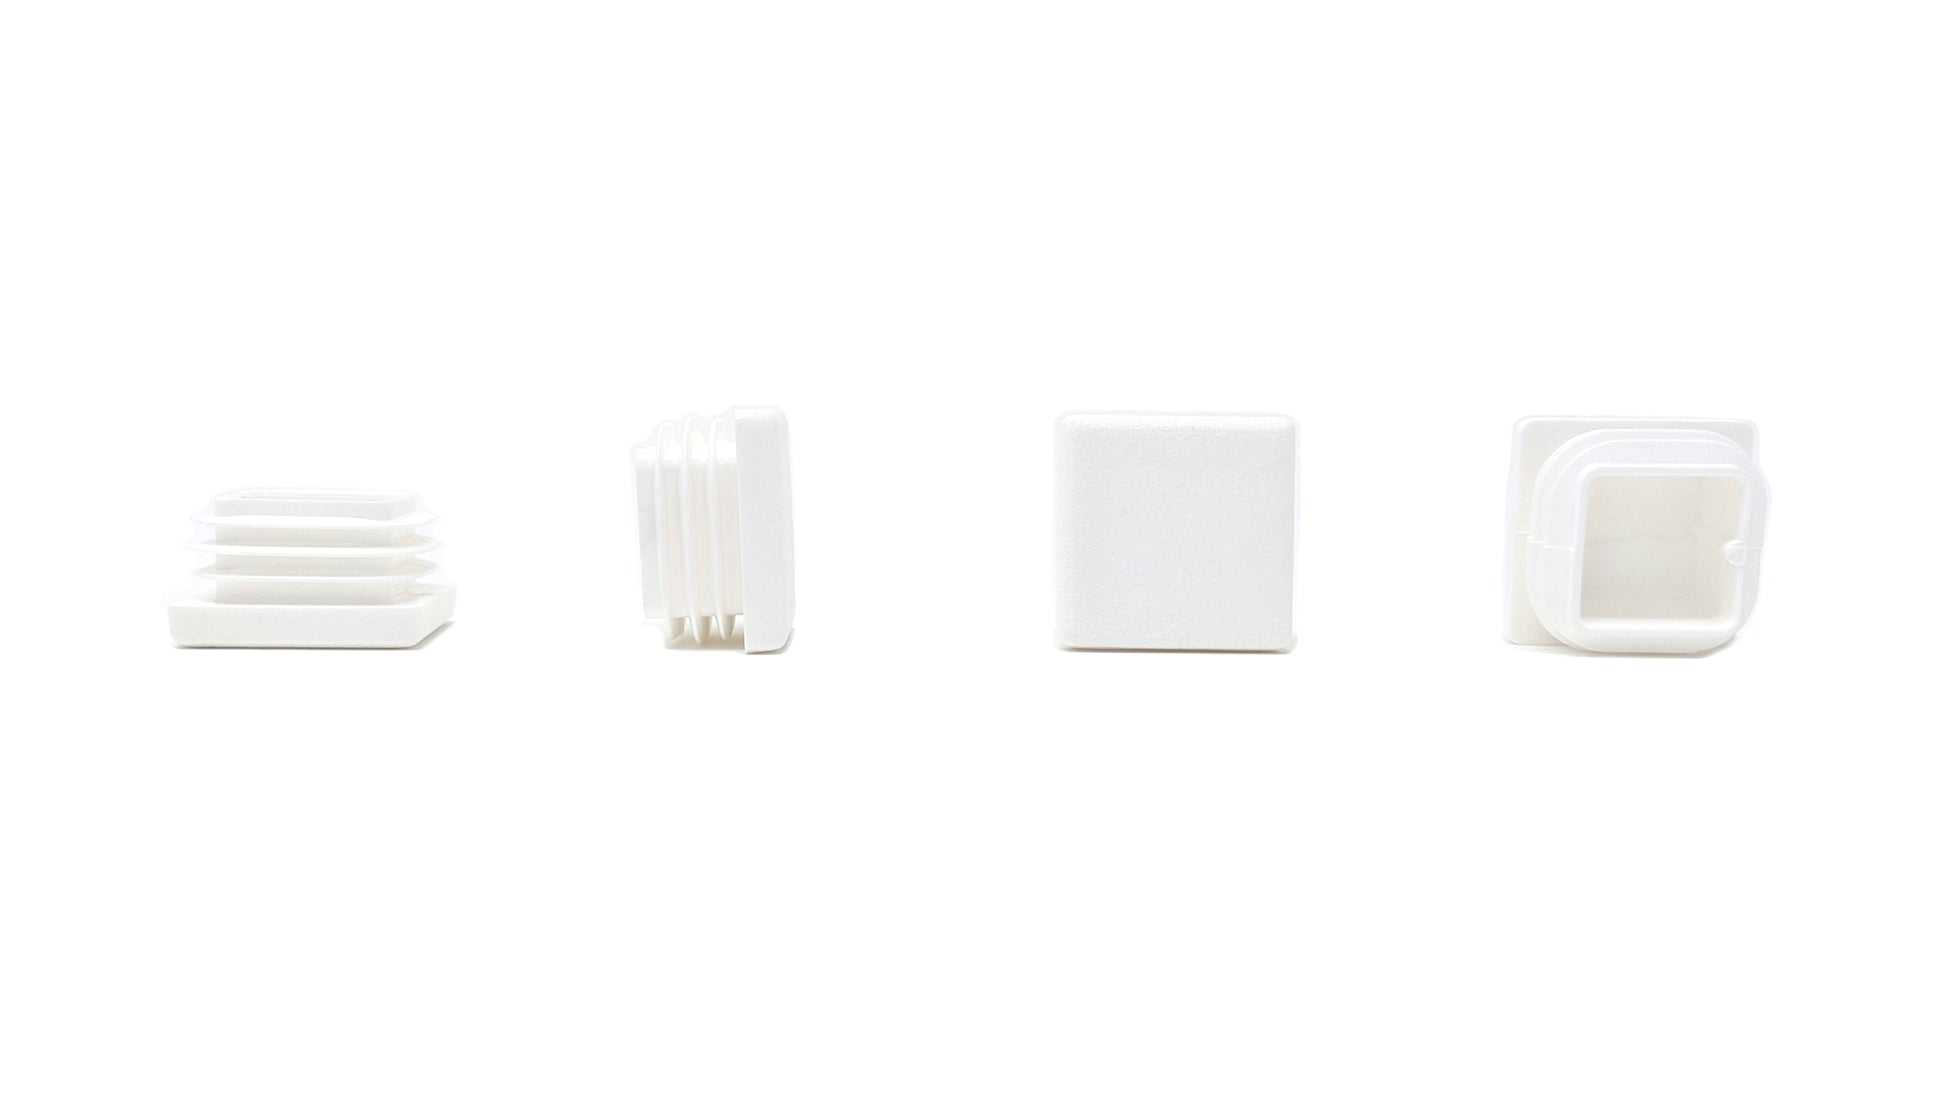 Square Tube Inserts 28mm x 28mm White | Made in Germany | Keay Vital Parts - Keay Vital Parts